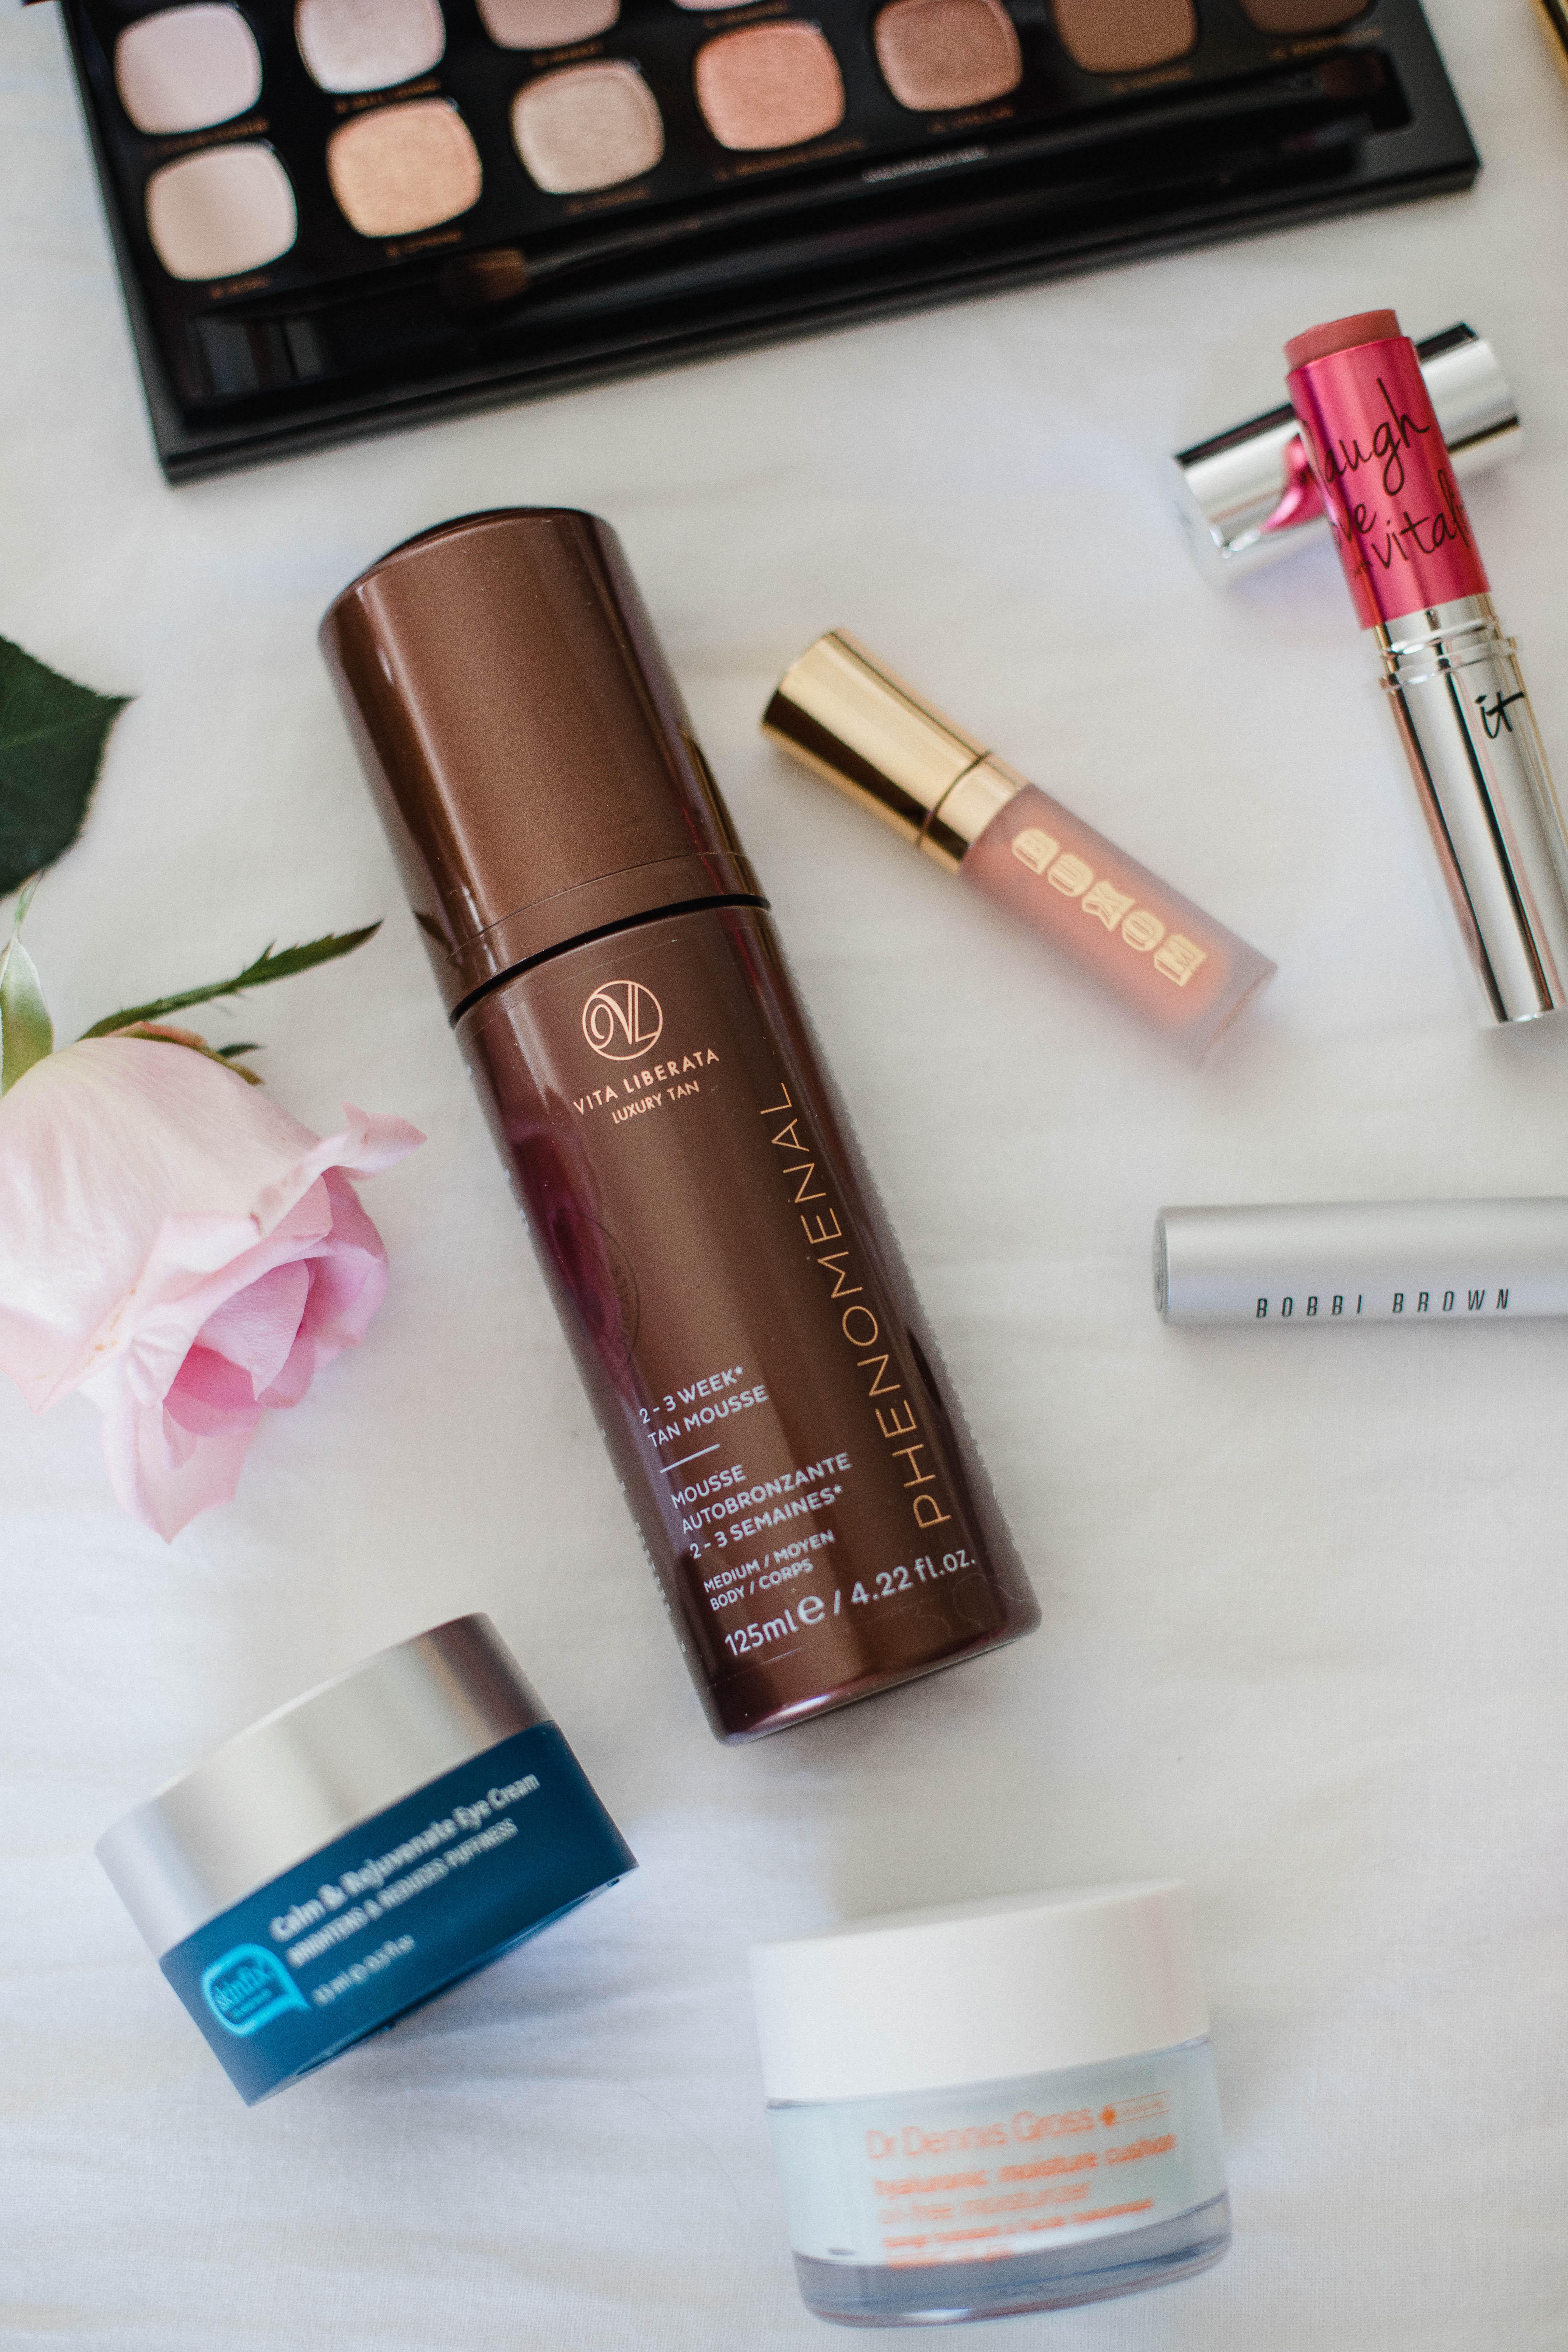 Life and style blogger Lauren McBride shares 8 must have products for spring, including a variety of skincare and beauty products. 